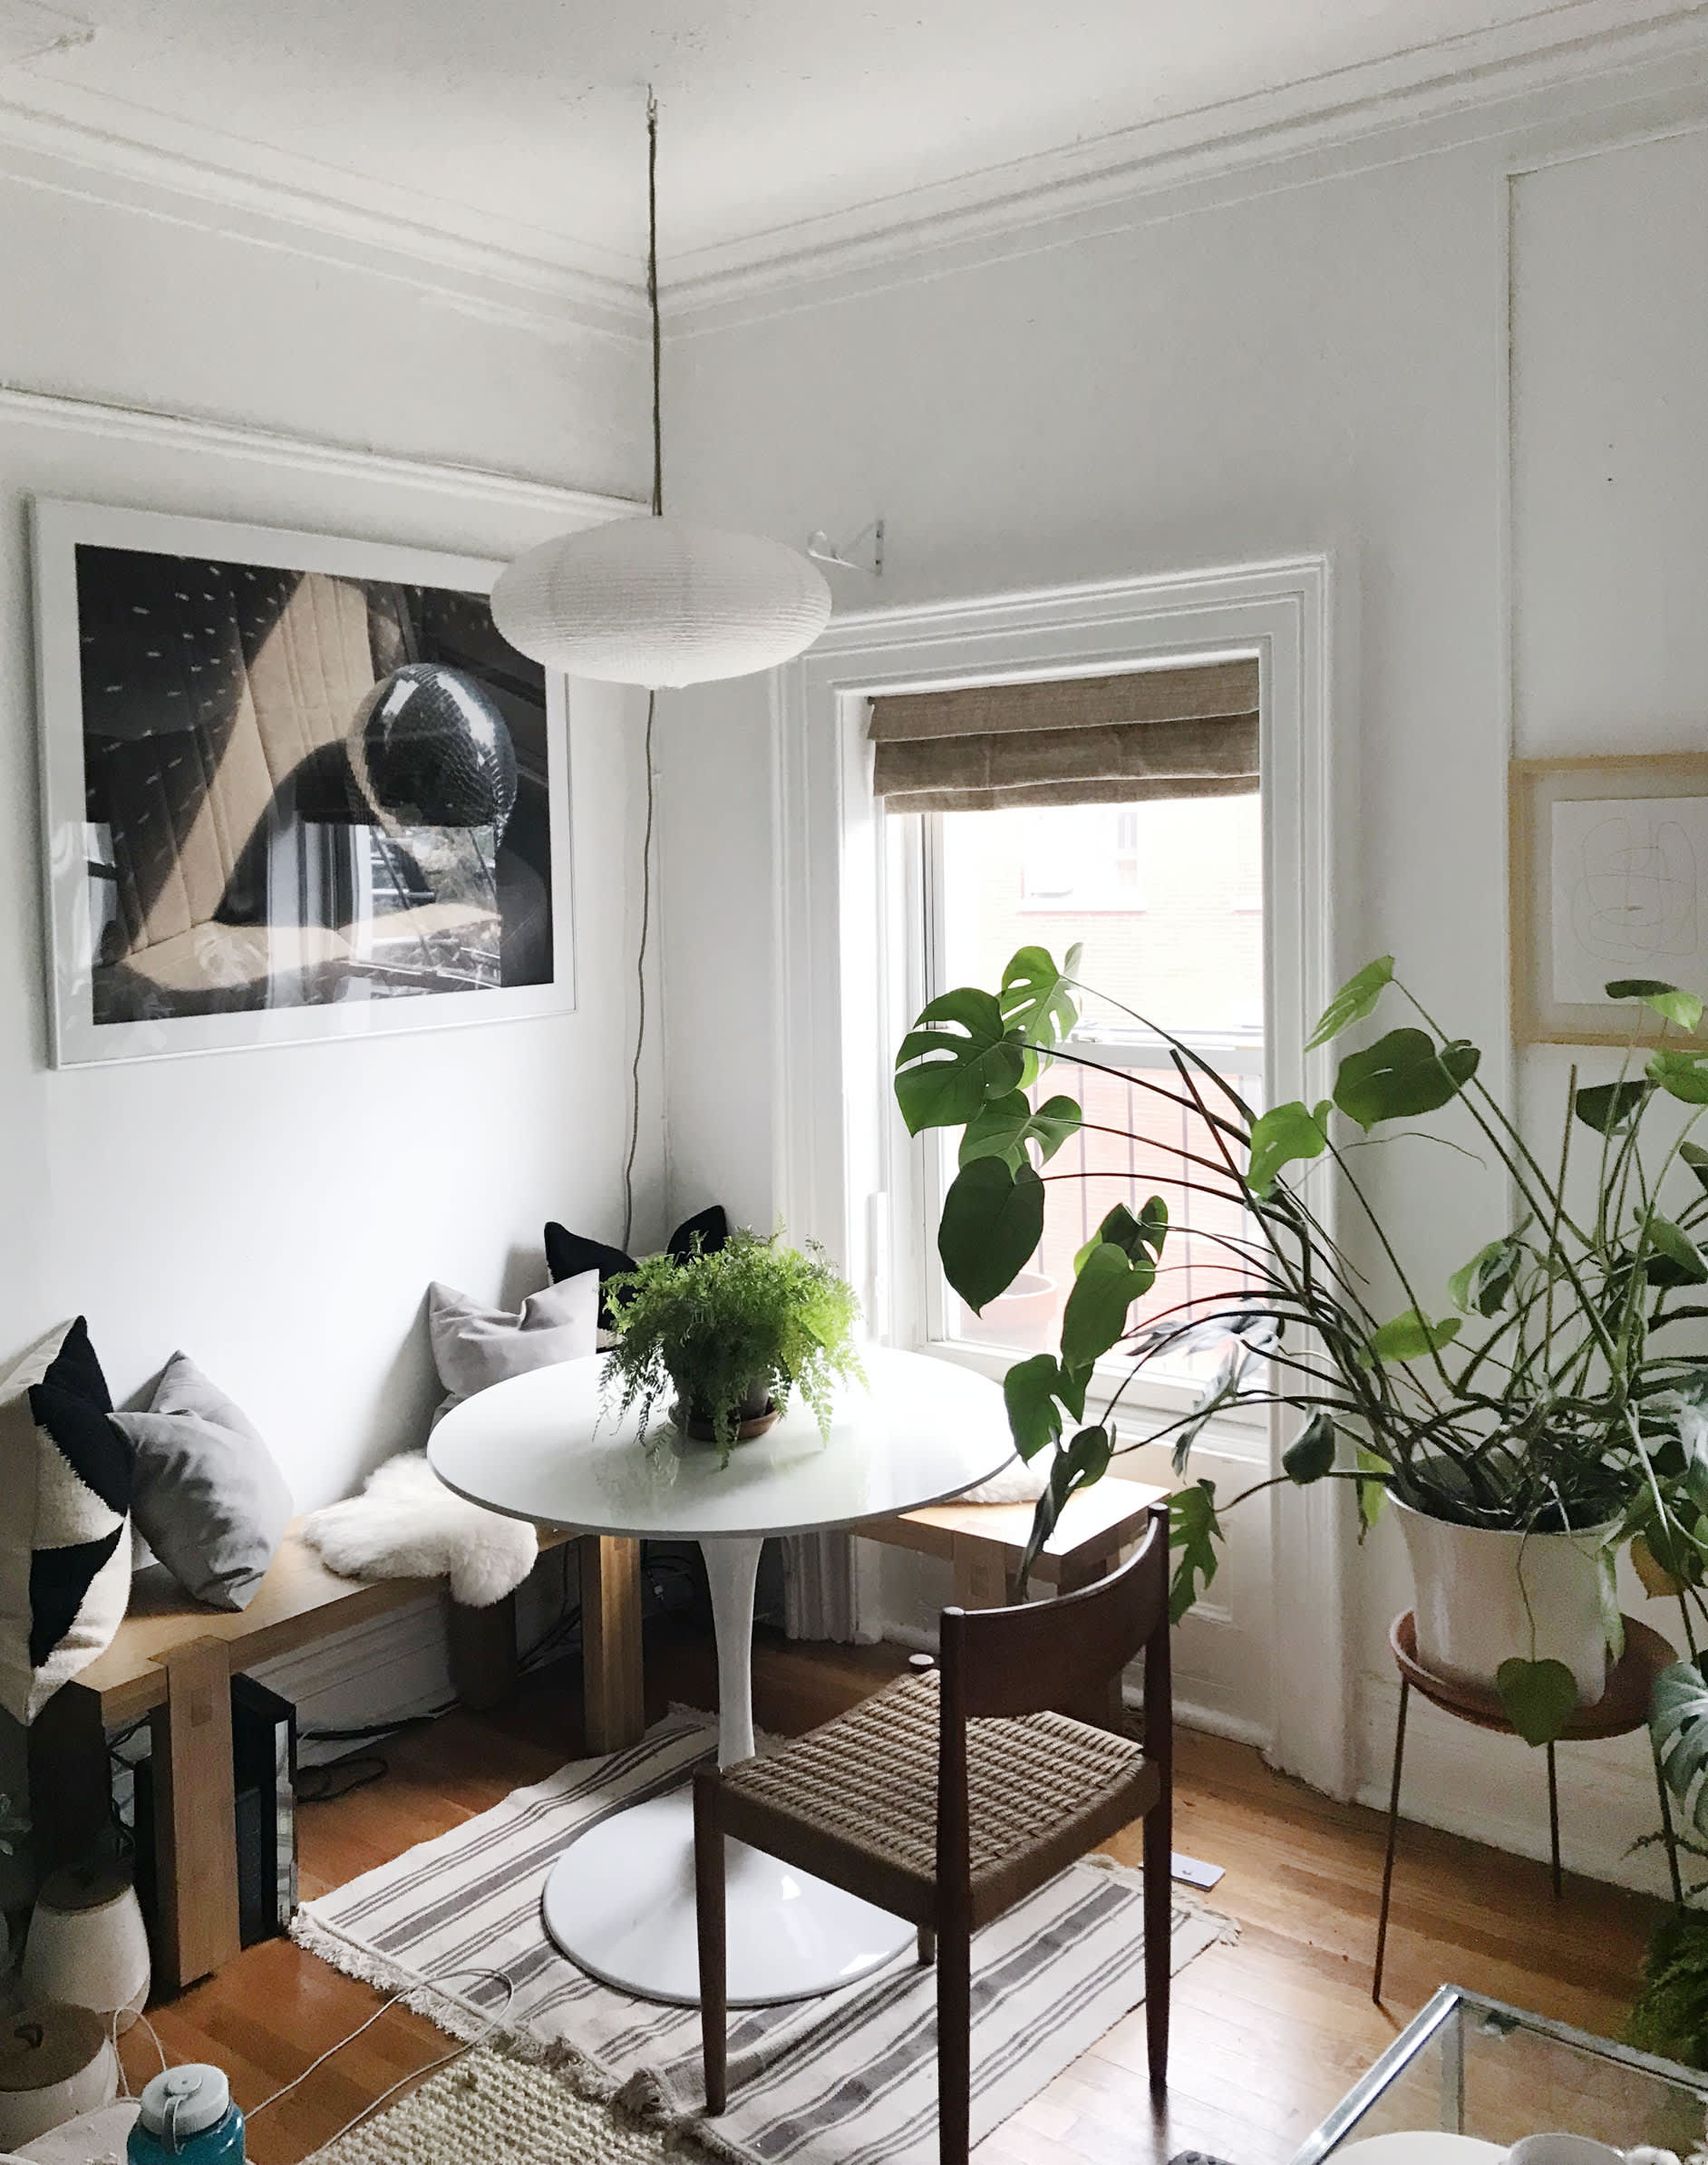 10 Small Living Rooms That Make Space for a Dining Table, Too